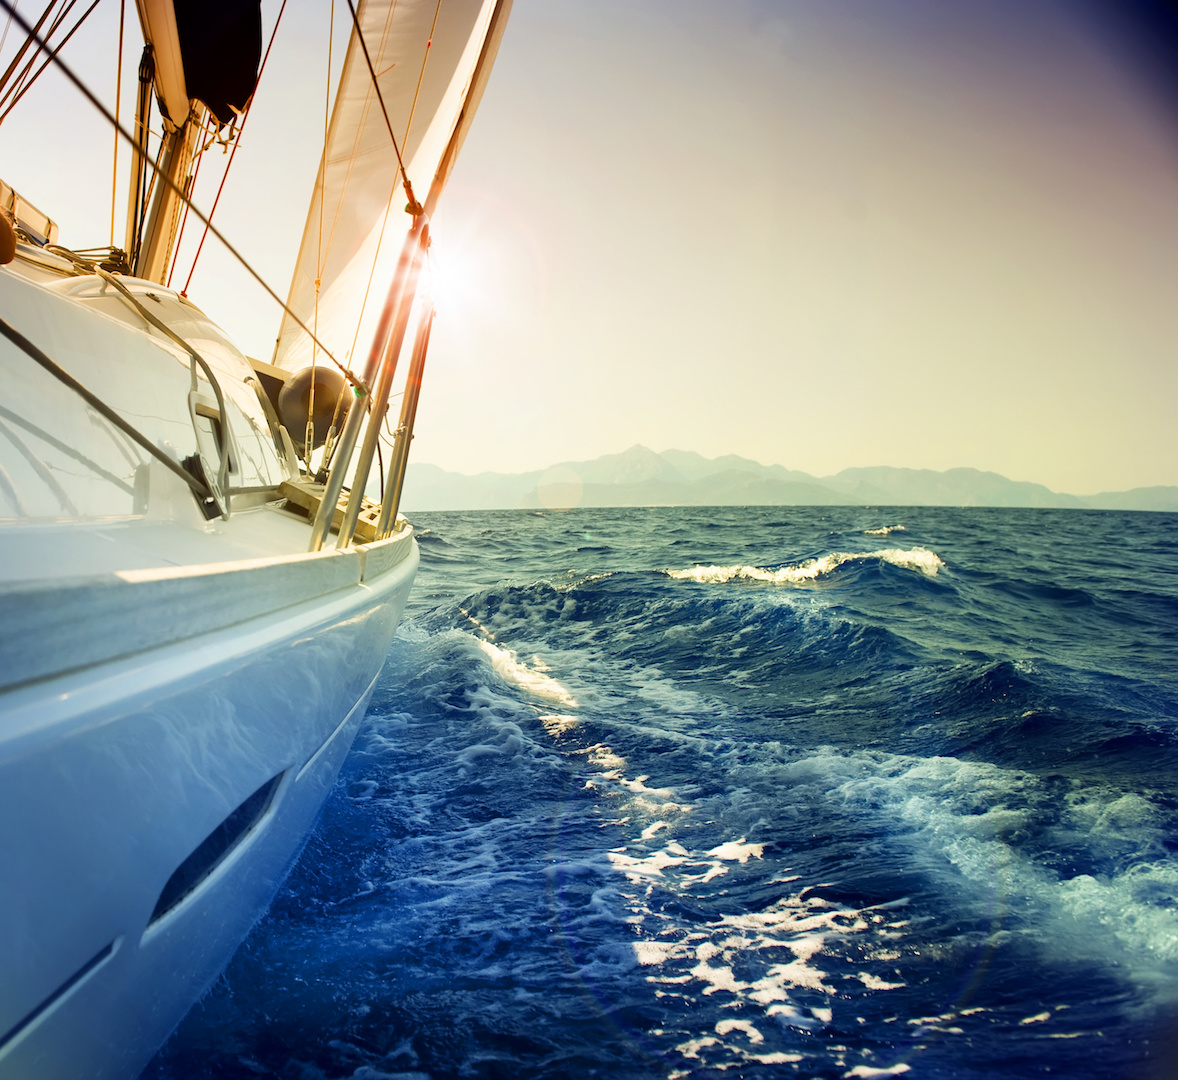 SAILING INTO THE SUMMER REAL ESTATE MARKET-HOW THE TRENDS AFFECT YOU